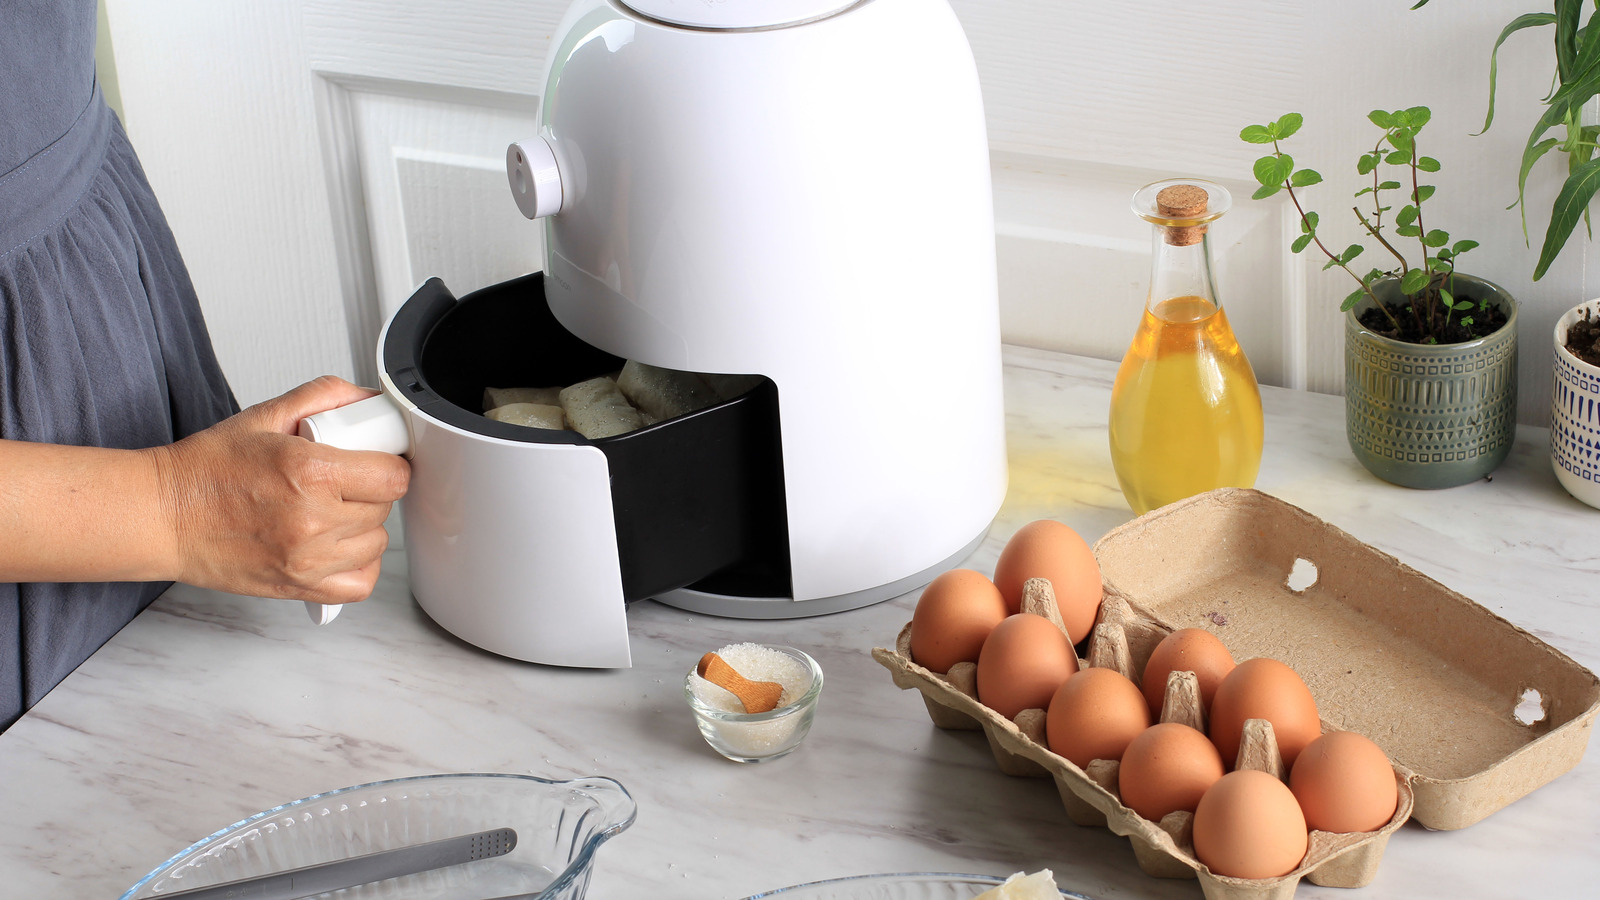 https://www.tastingtable.com/img/gallery/10-air-fryer-tips-that-will-elevate-your-eggs-to-a-new-level/l-intro-1694108814.jpg